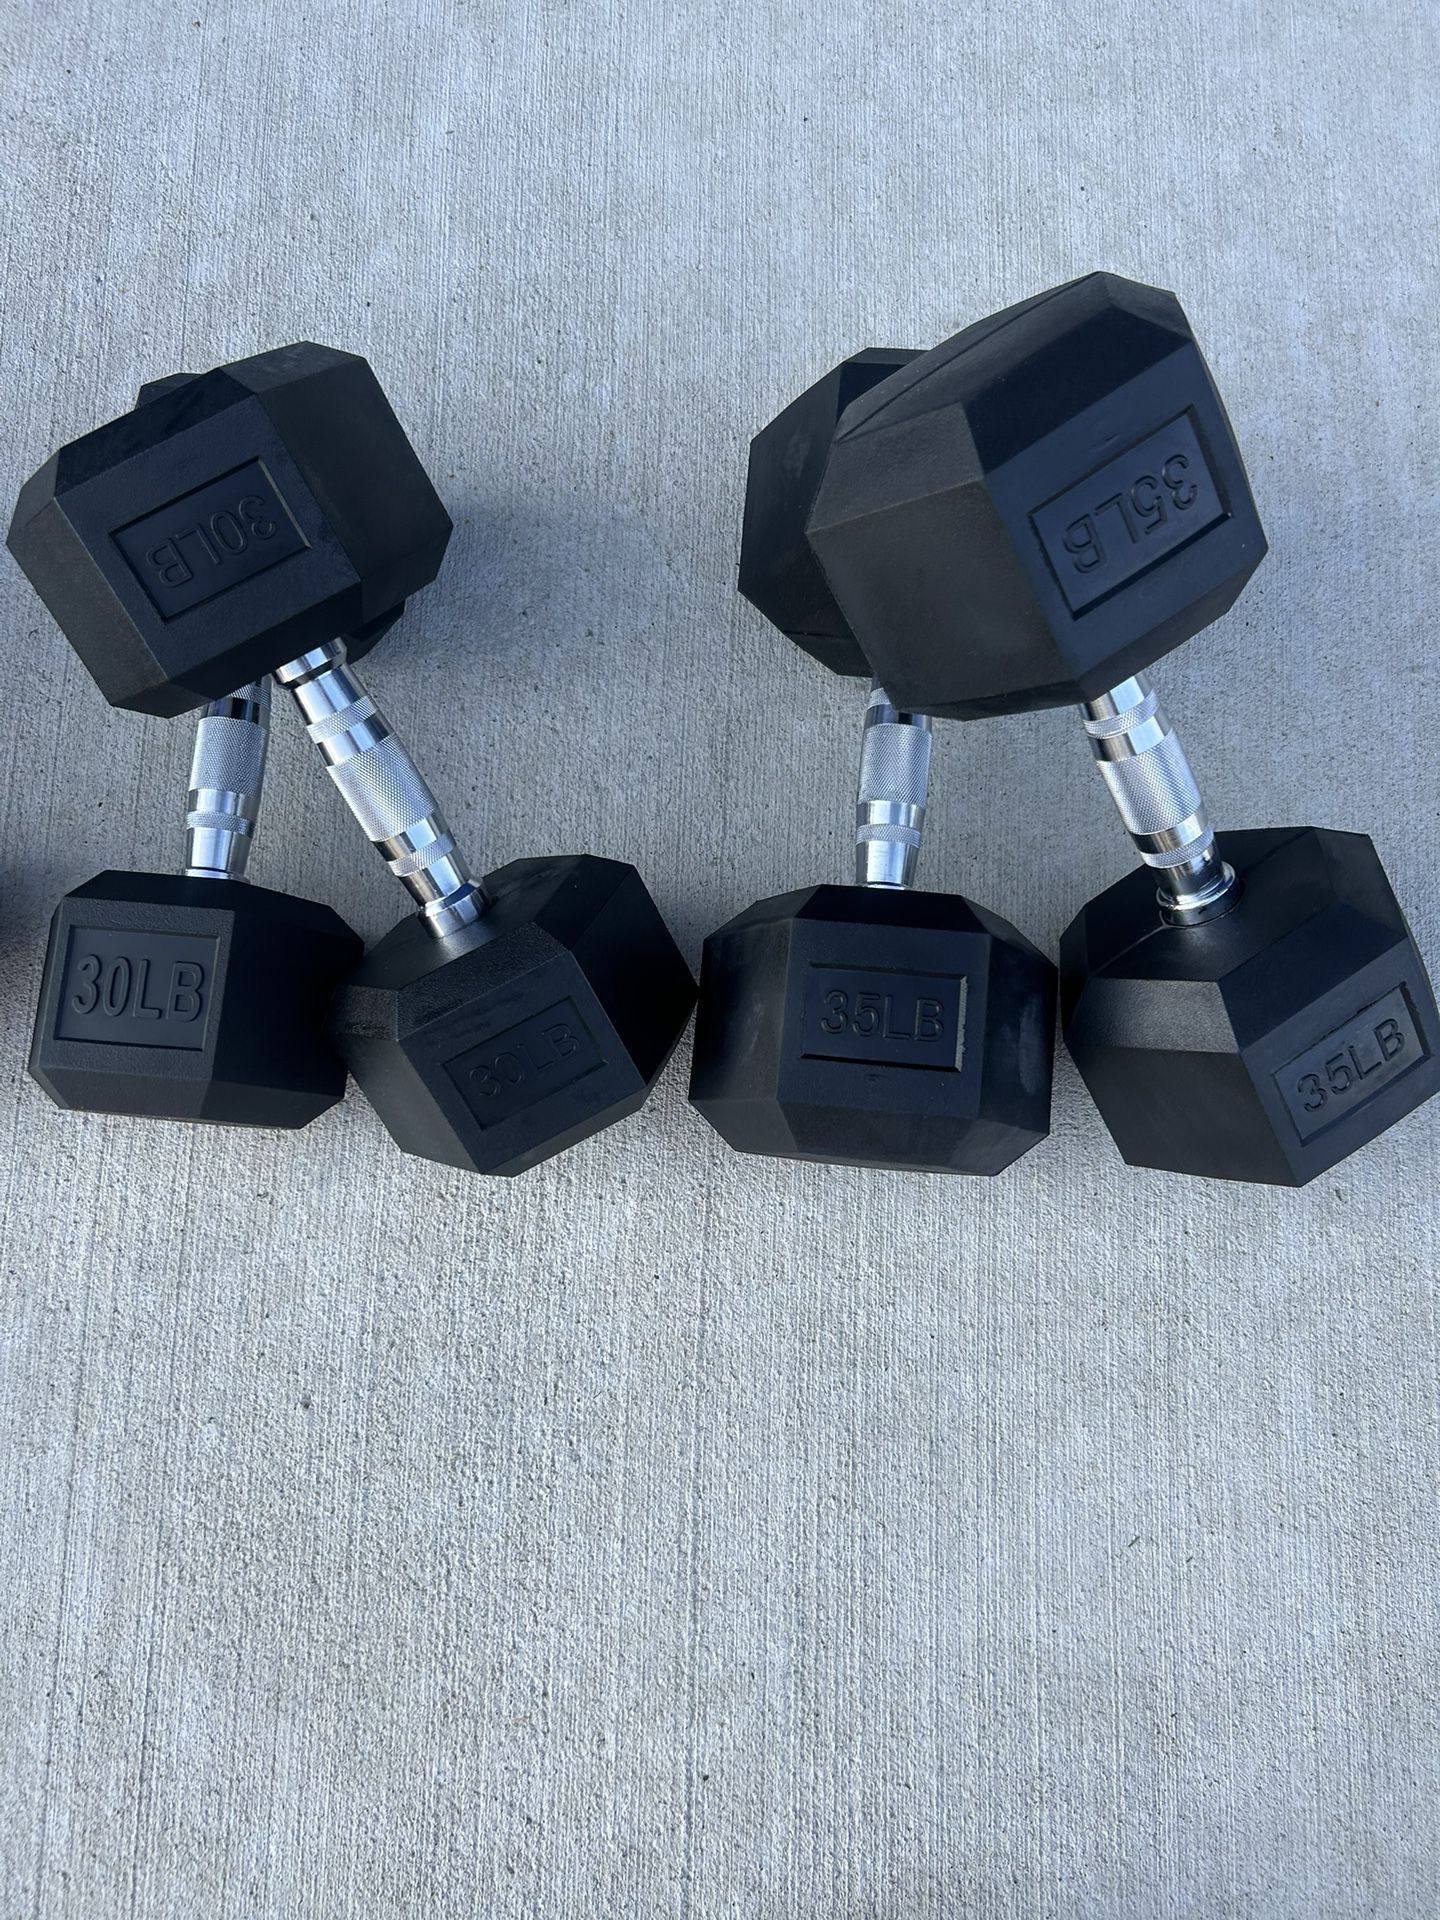 new  pair of 30lb and 35lb rubber dumbbells  $130